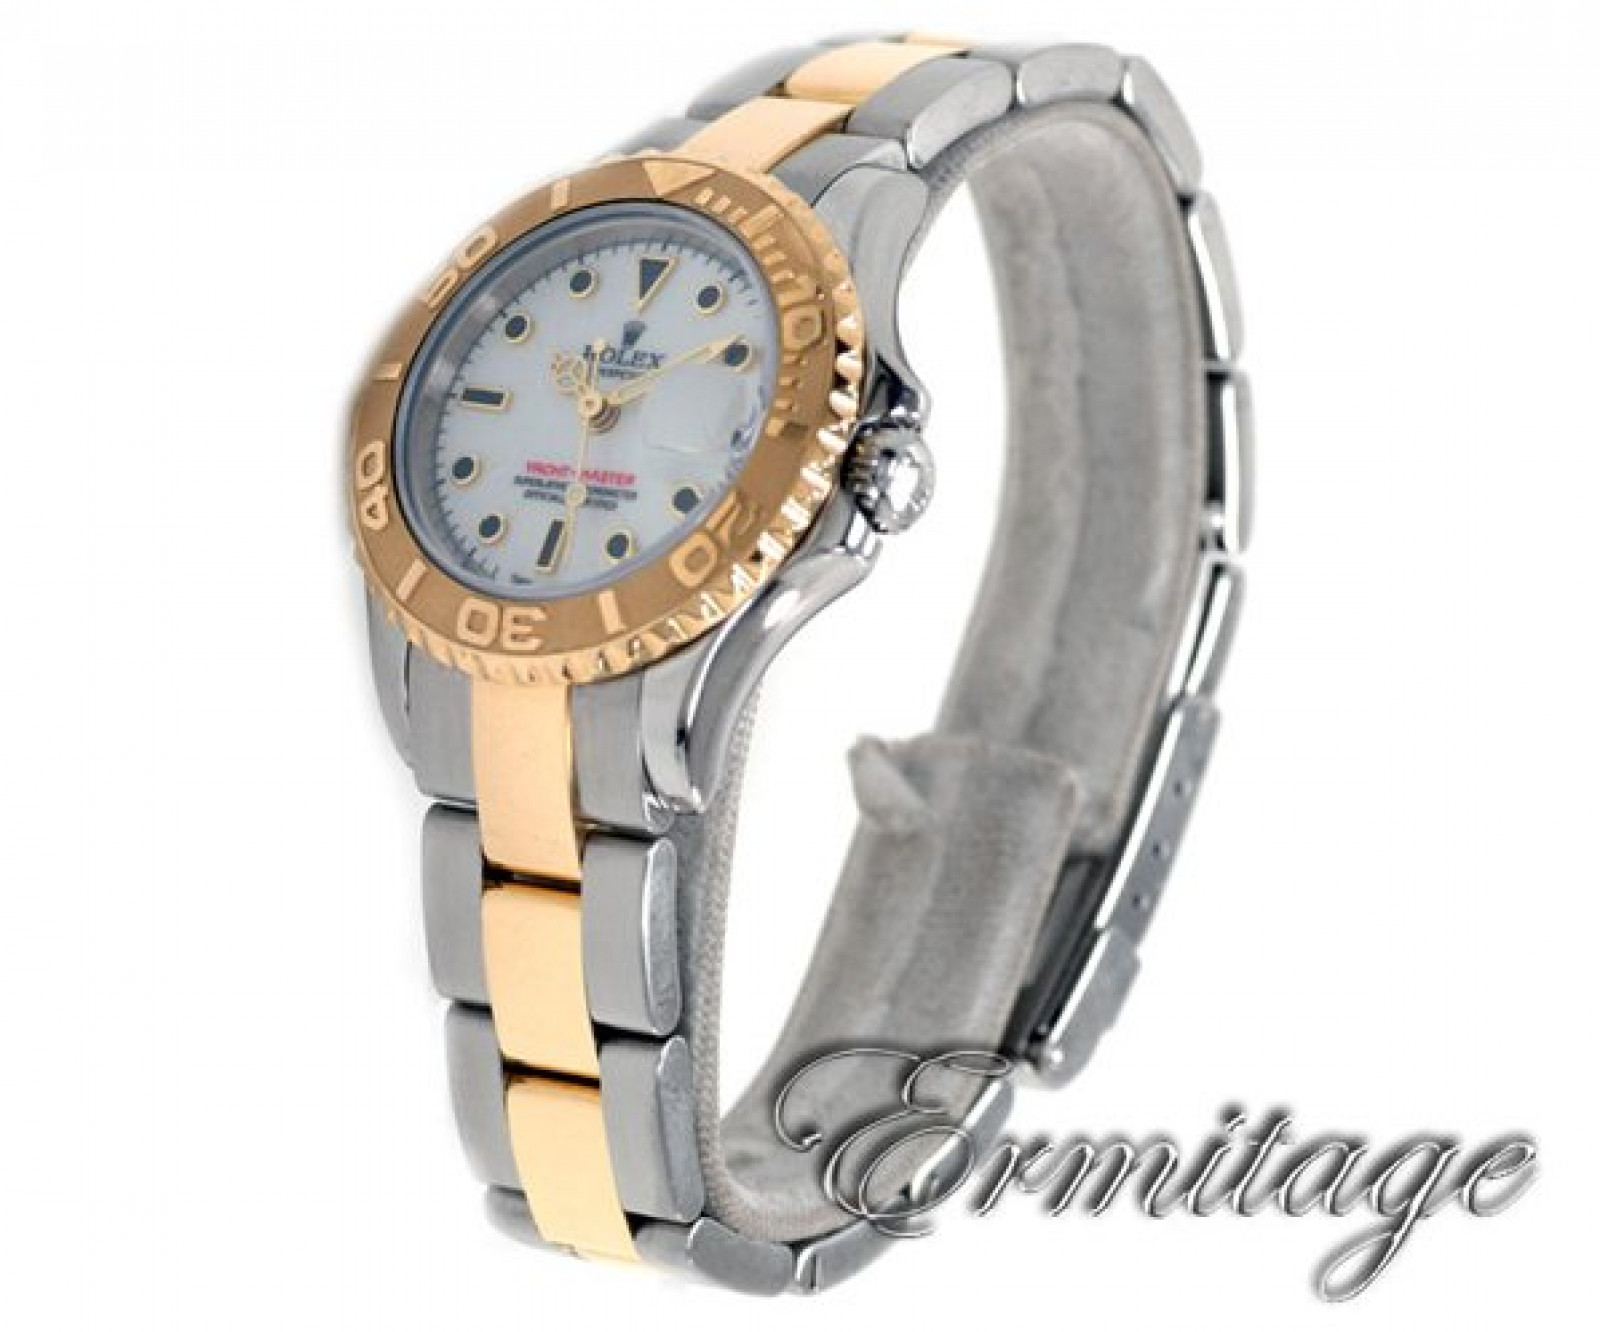 Ladies Rolex Yacht-Master at Ermitage Jewelers